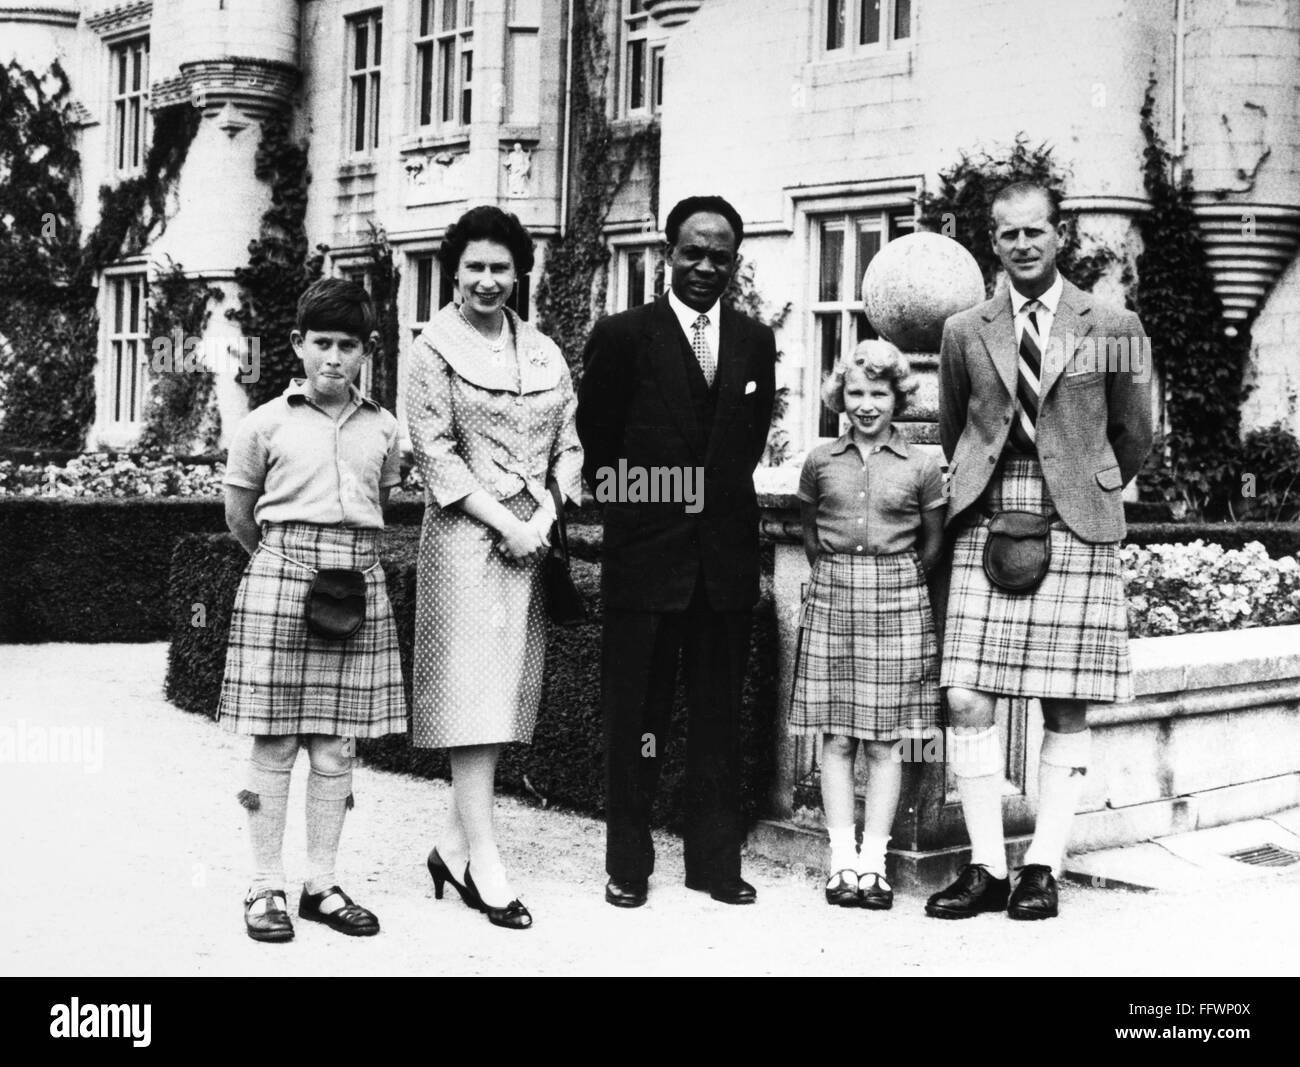 kwame-nkrumah-1909-1972-nghanaian-prime-minister-photographed-with-FFWP0X.jpg